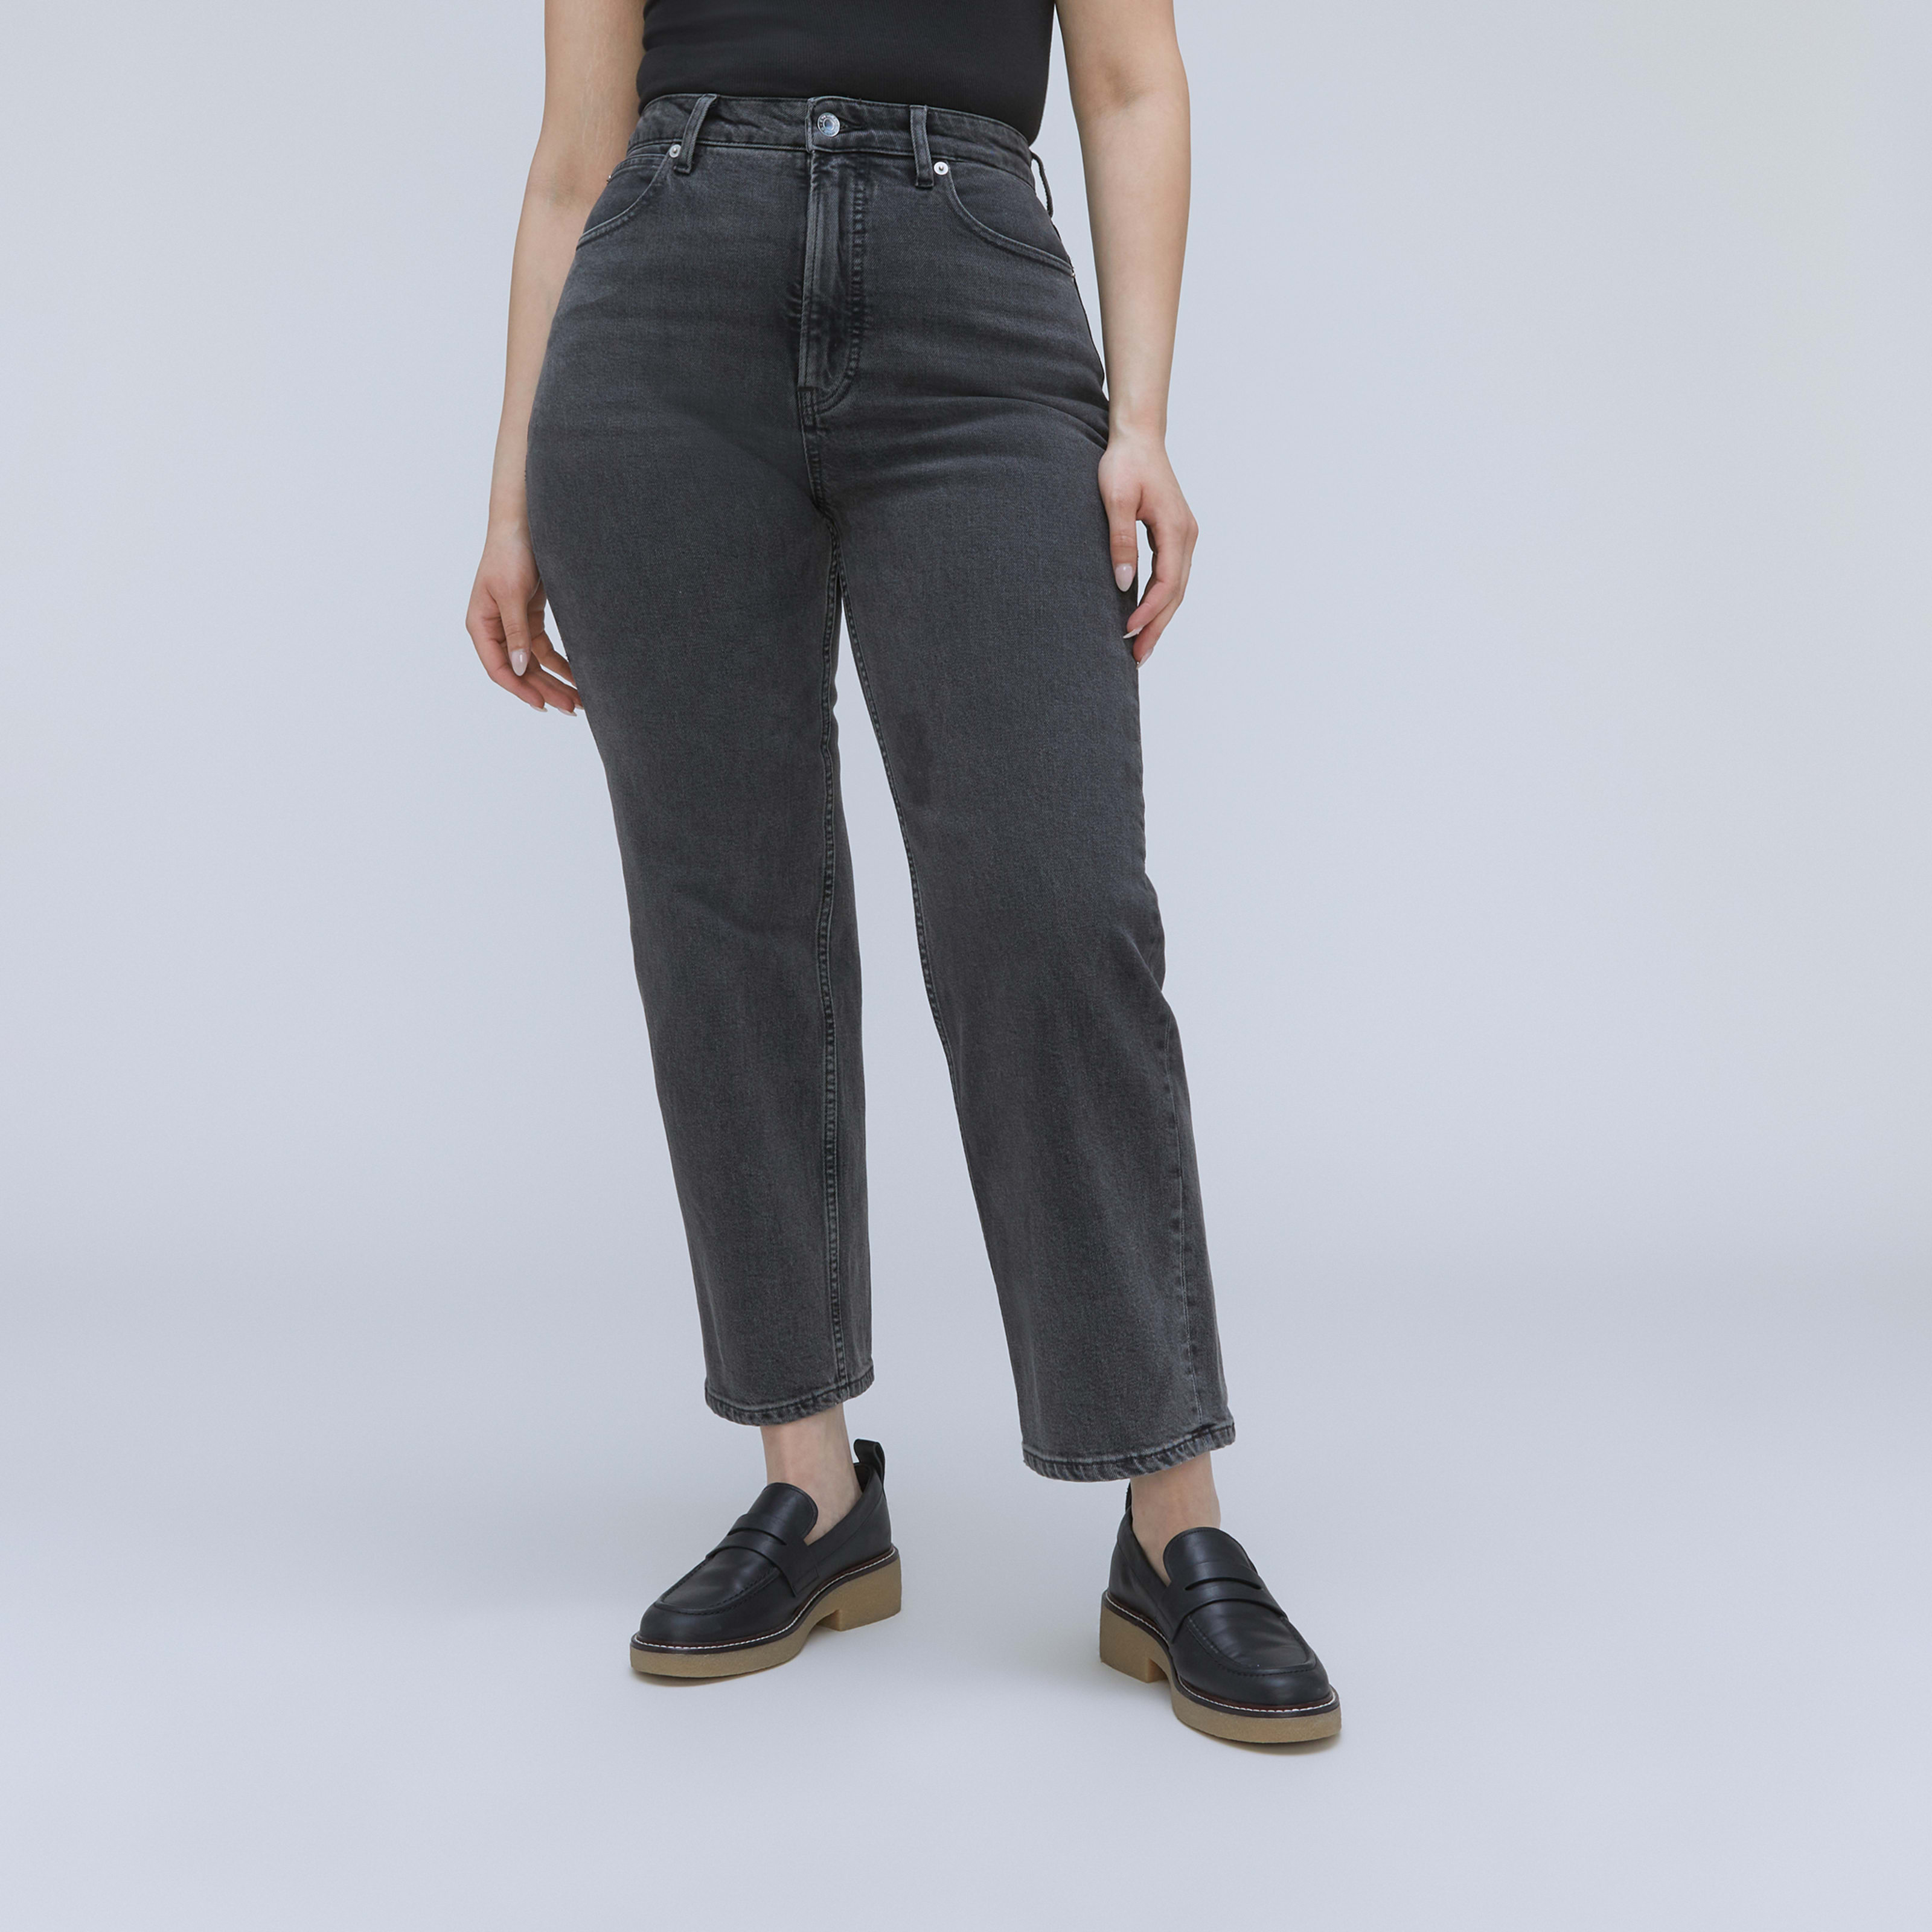 women's curvy way-highâ® jean by everlane in washed black, size 32